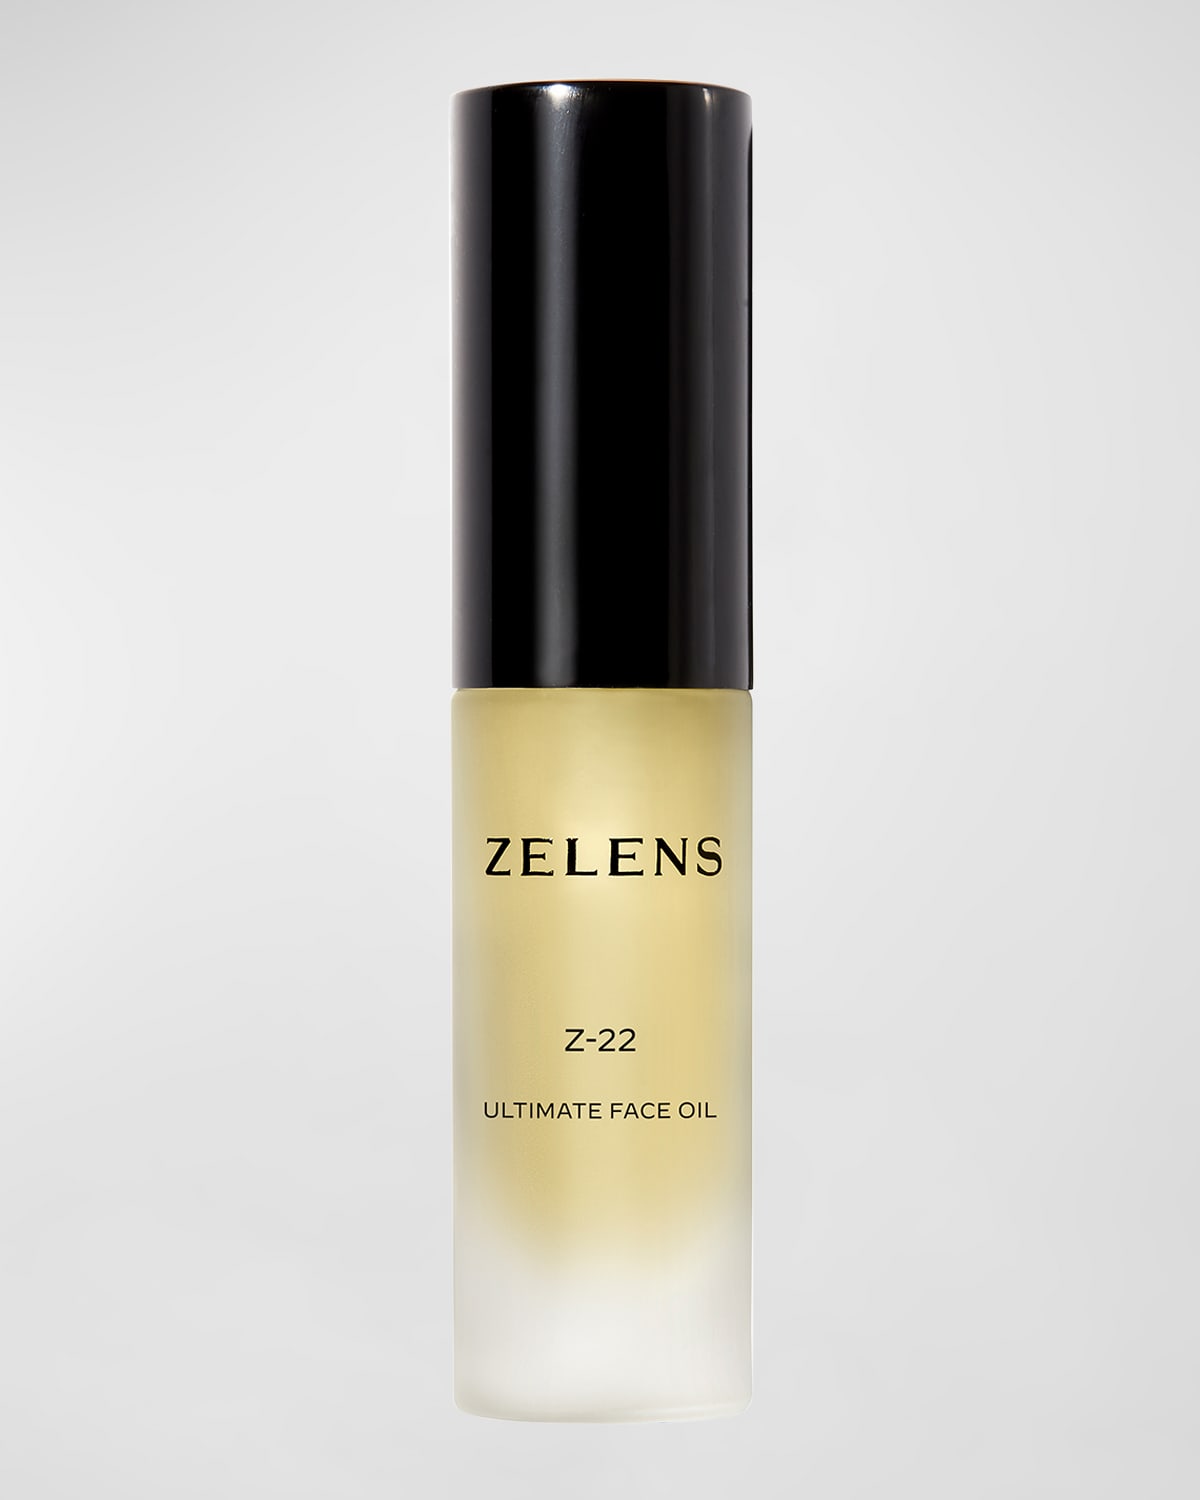 Z-22 Ultimate Face Oil, 0.3 oz. - Yours with any $150 Zelens Purchase